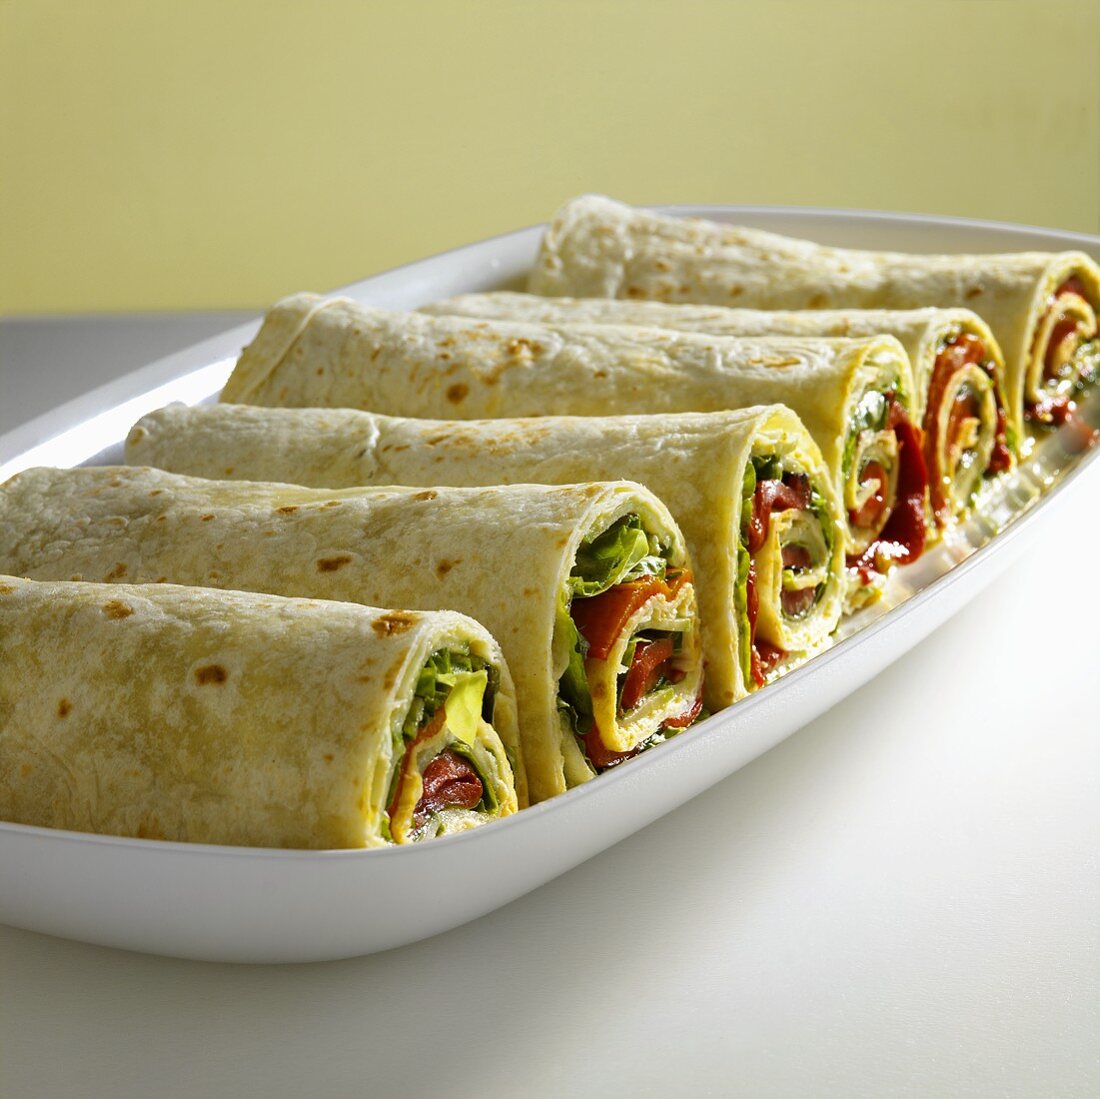 Six wraps filled with hummus and vegetables